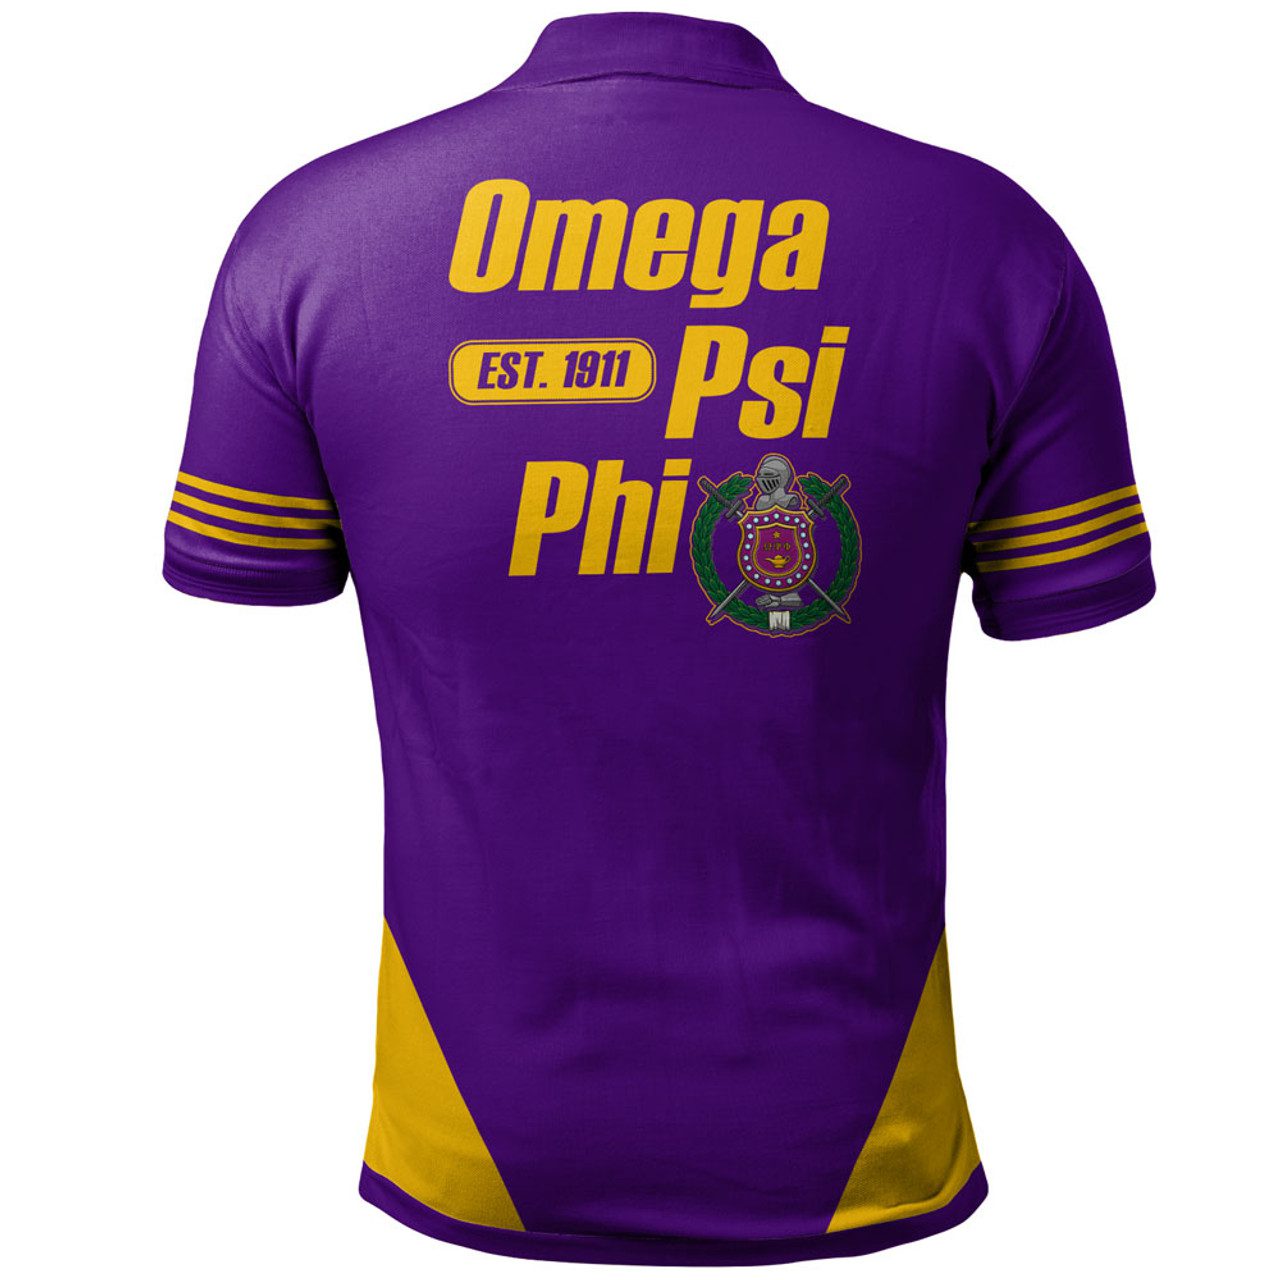 Omega Psi Phi Polo Shirt – Fraternity 1911 Founders Year Polo Shirt